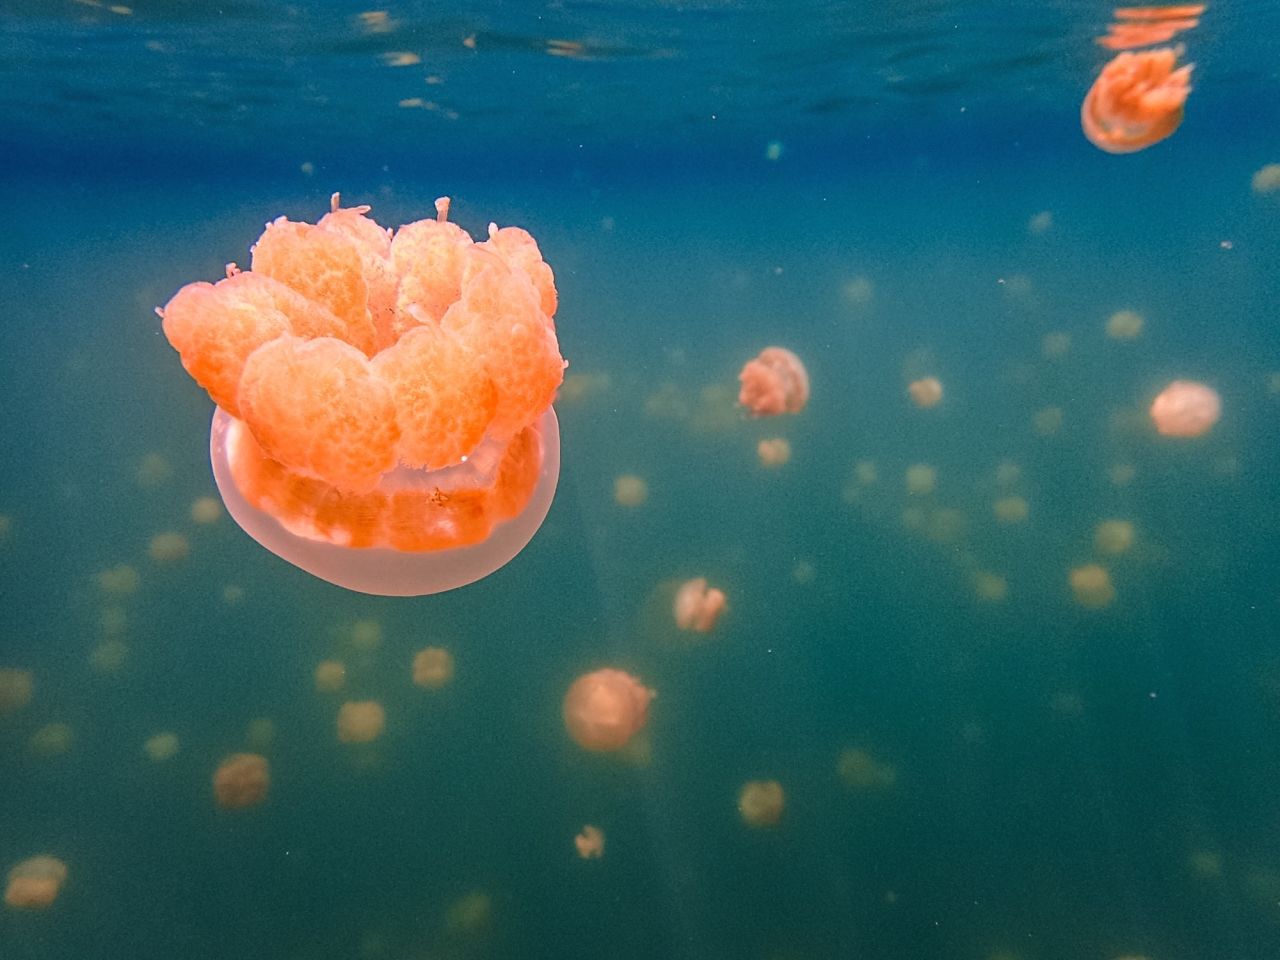 Palau's Jellyfish Lake. Not to worry, these cute little dudes can't hurt you. An ecotourism leader, Palau has one of the world's highest marine biodiversity populations.